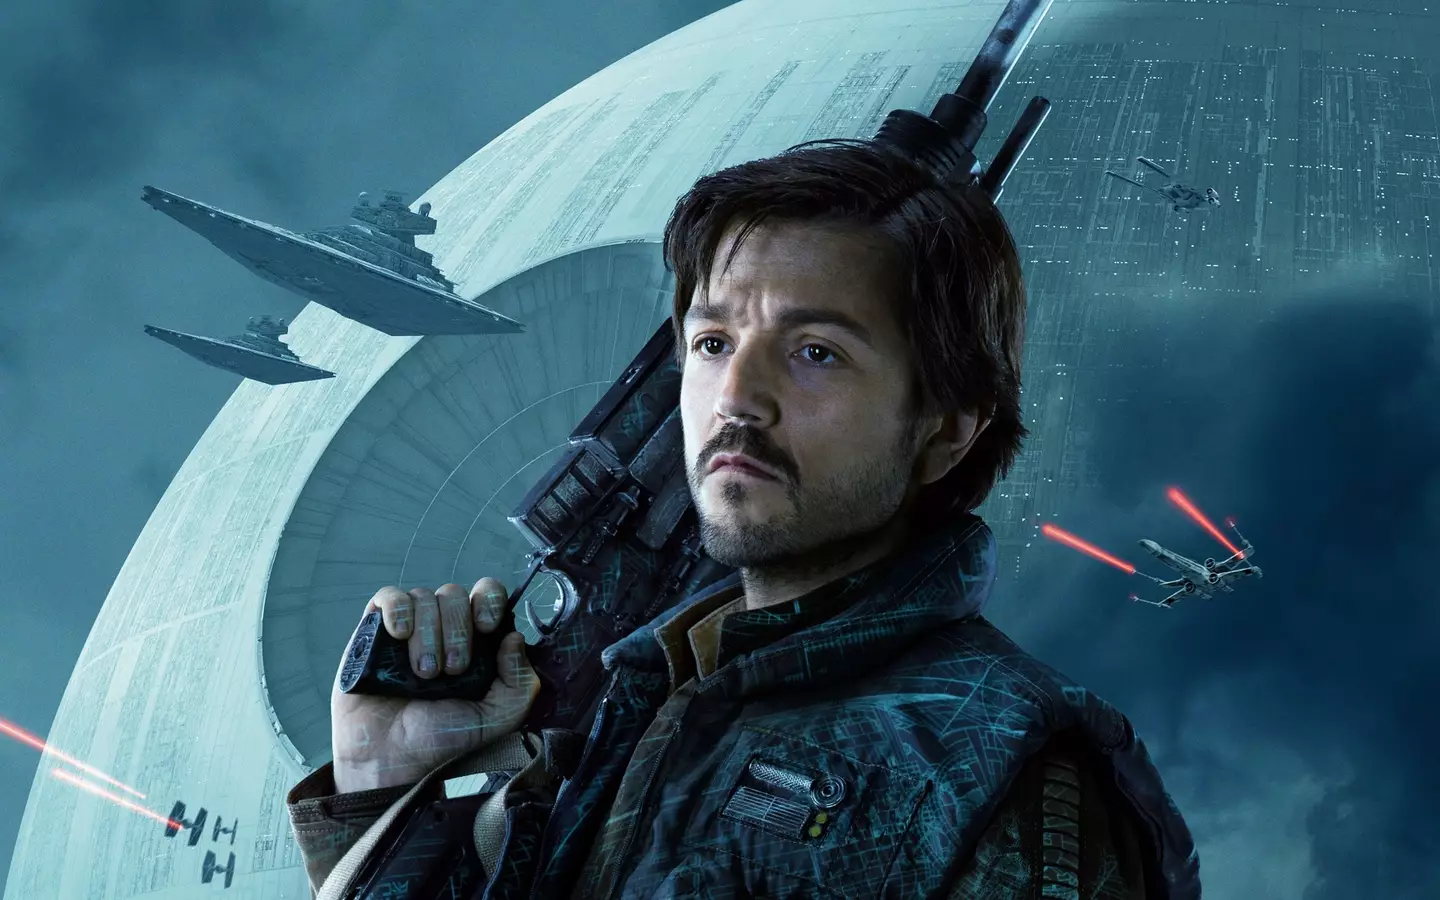 Cassian Andor first appeared in Rogue One, and Diego Luna says watching Andor will change the way you see that movie.